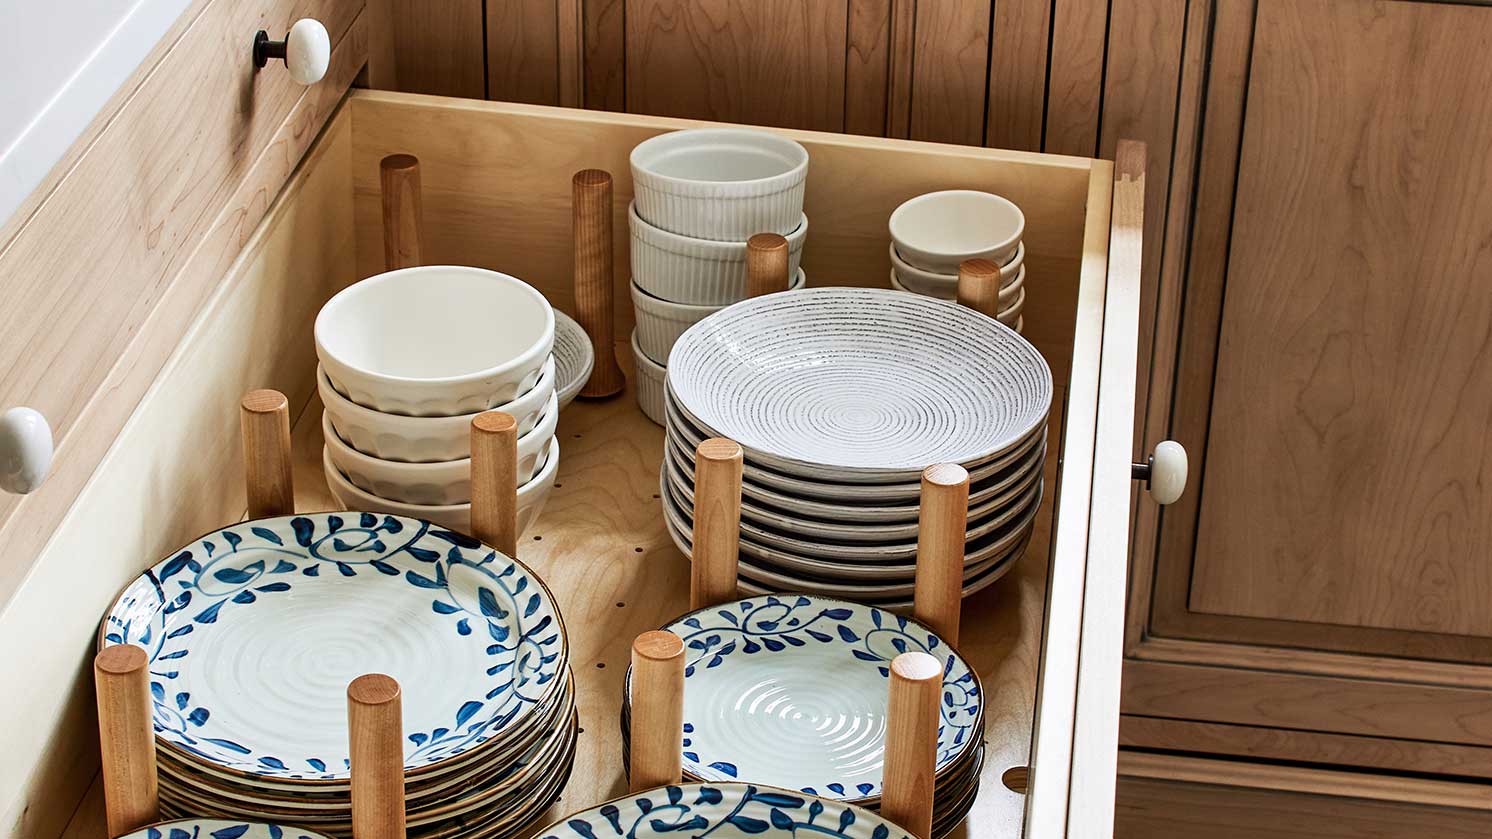 What's the best way to store dishes in a kitchen?